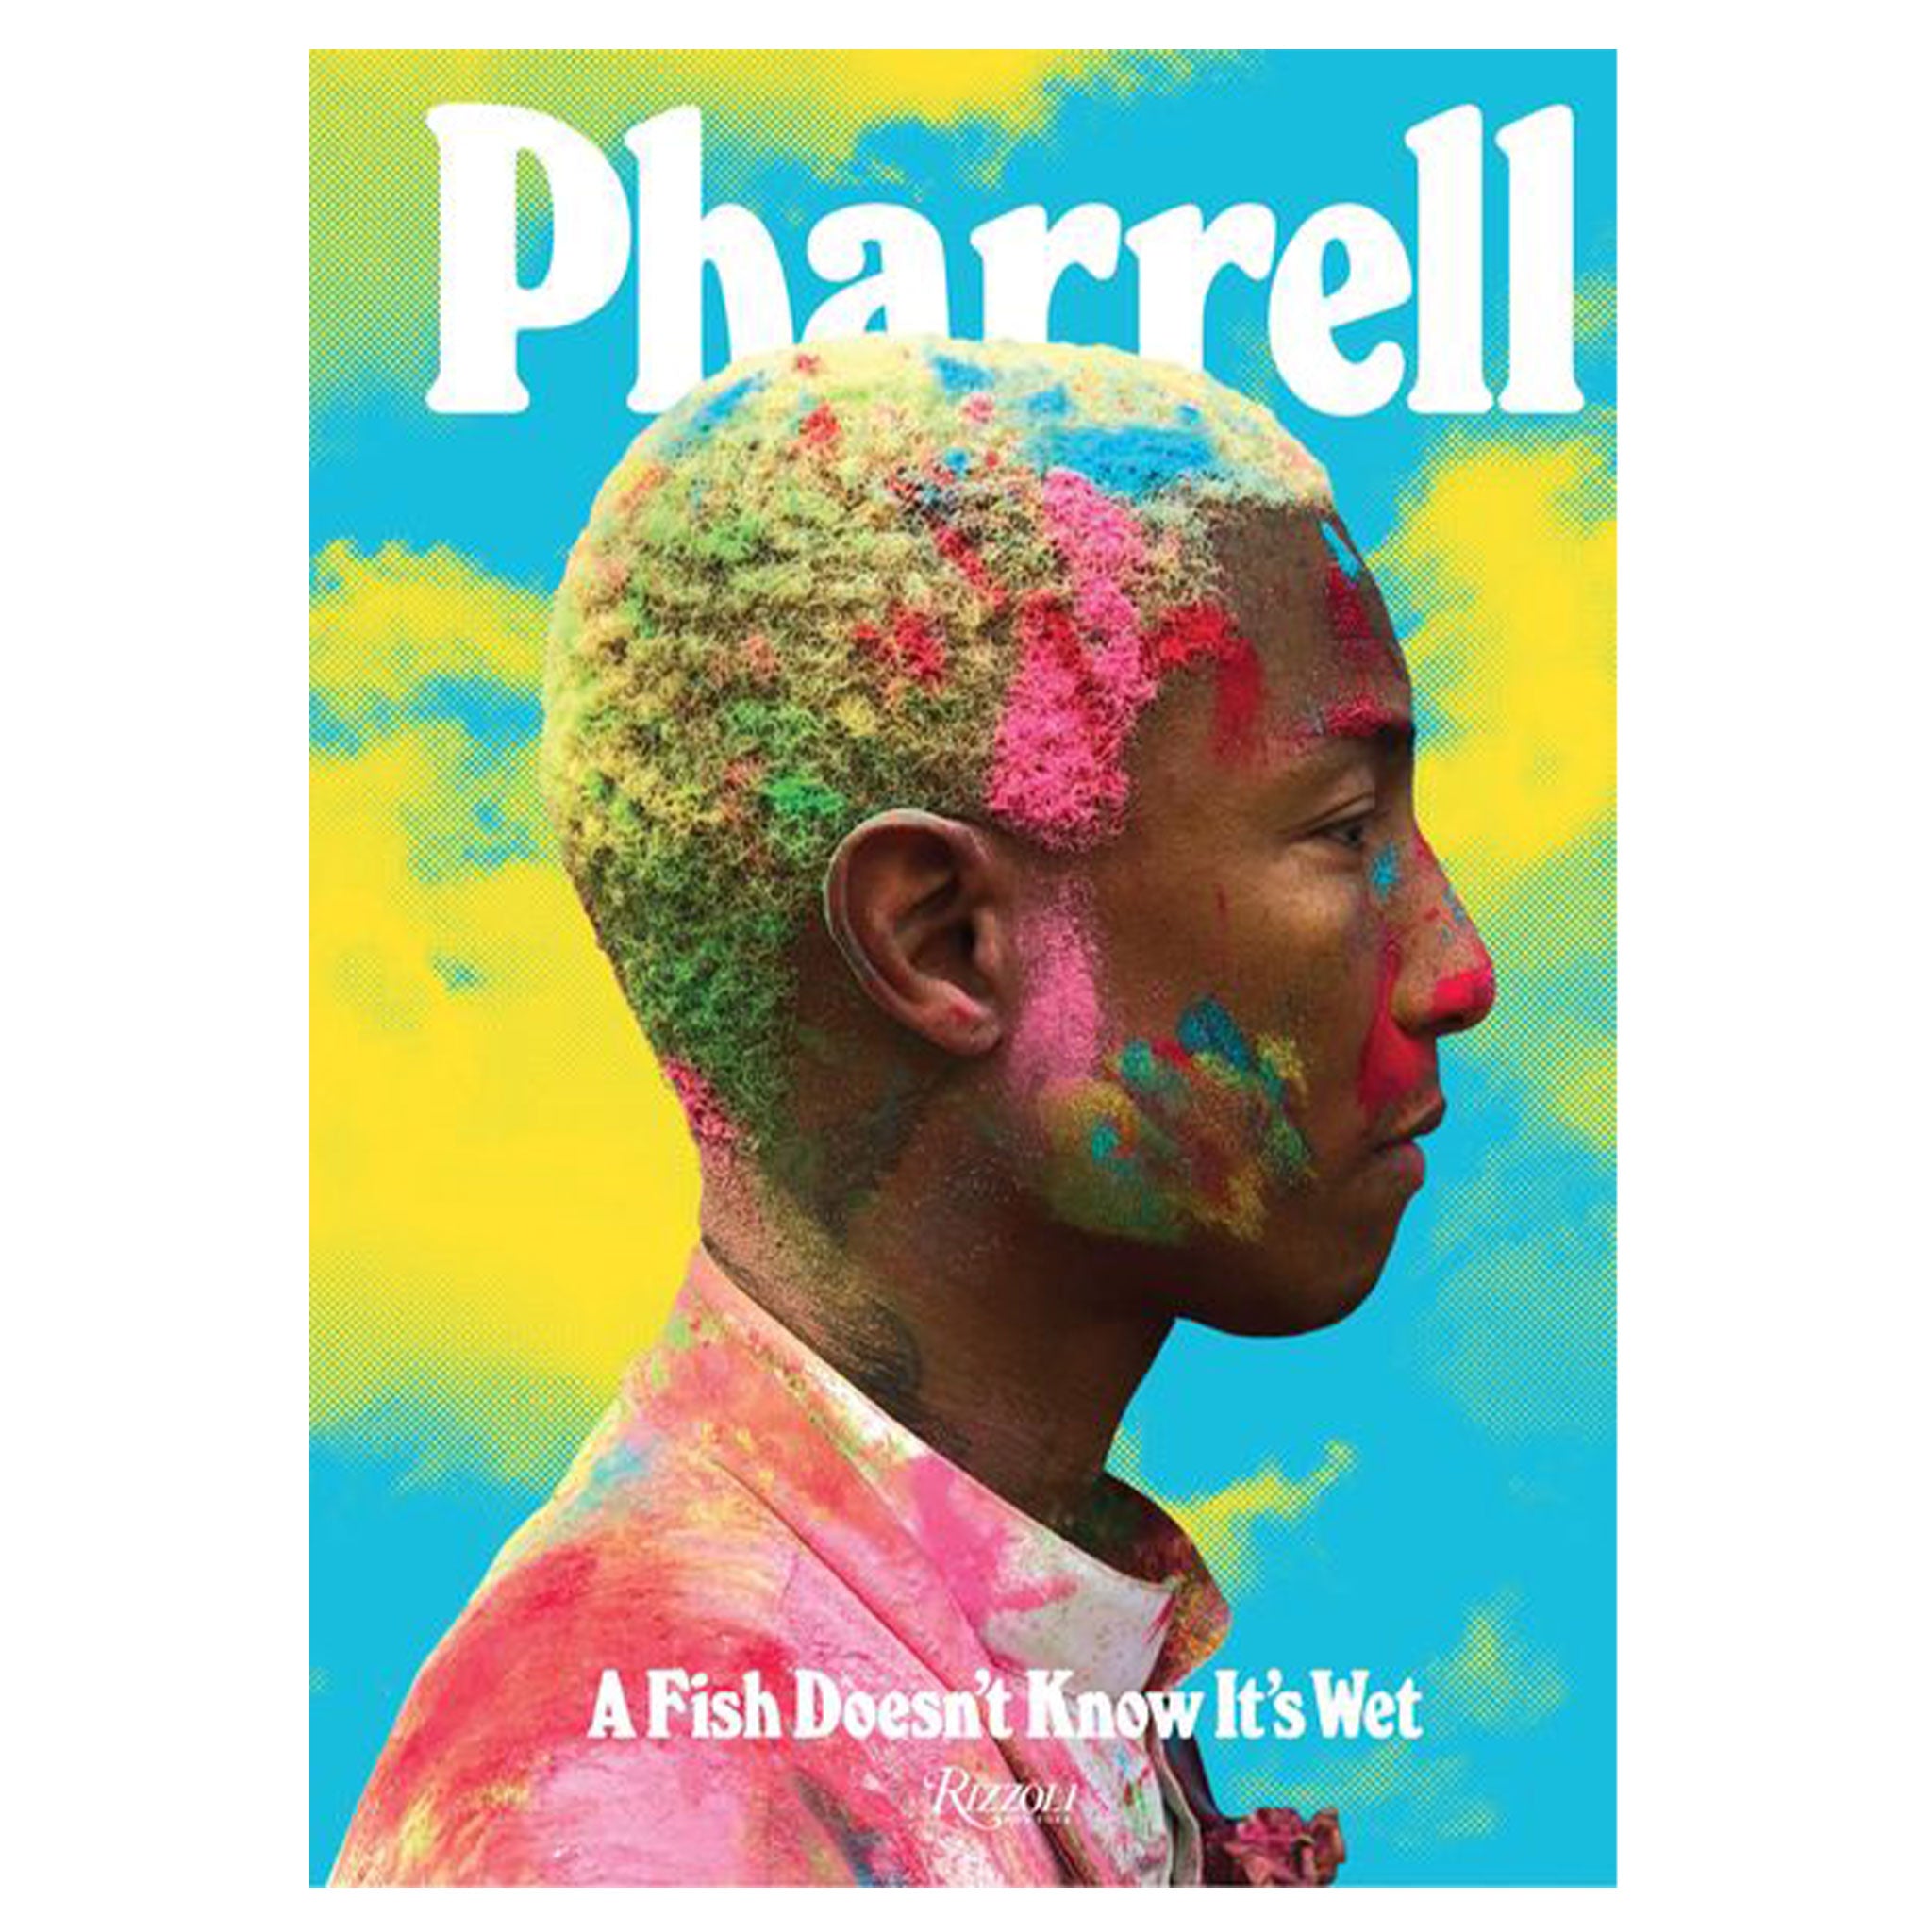 Pharrell Williams: A Fish Doesn't Know It's Wet